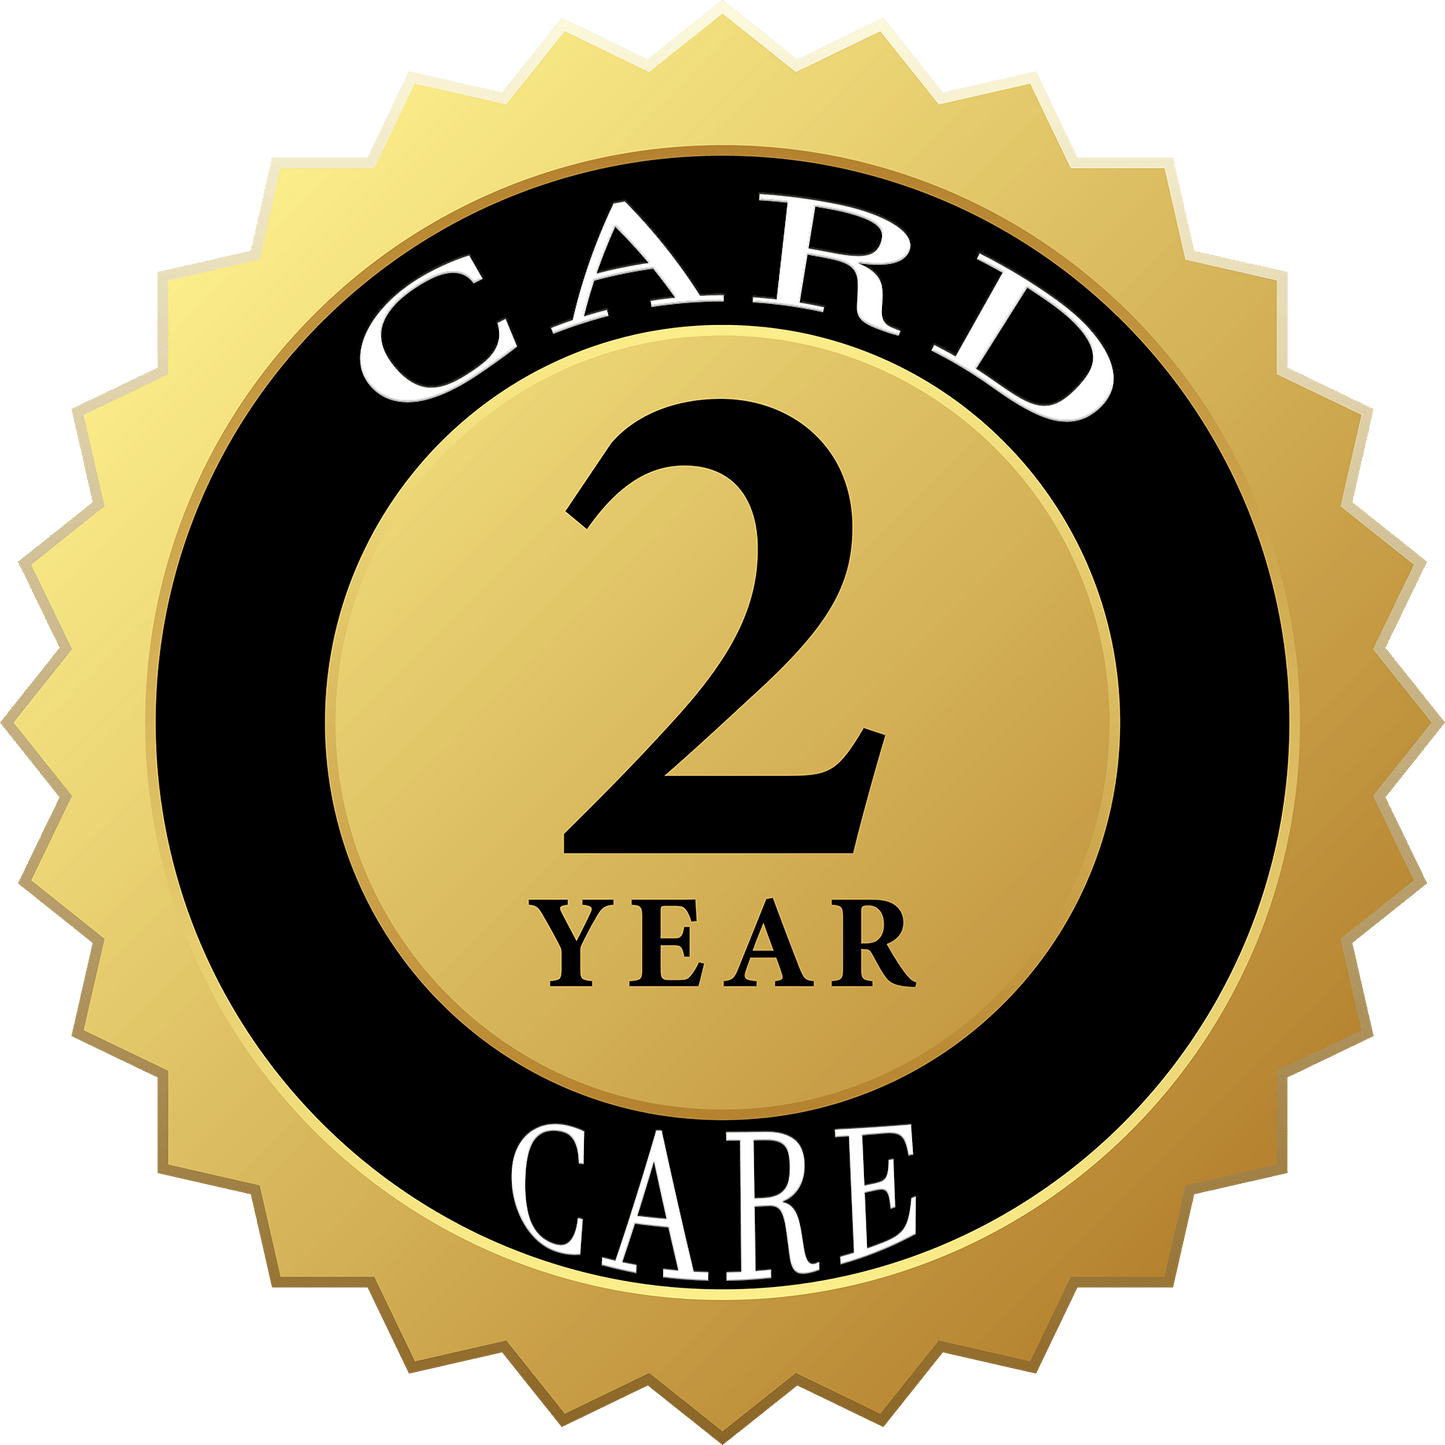 Card Care Insurance ( 2 Years)